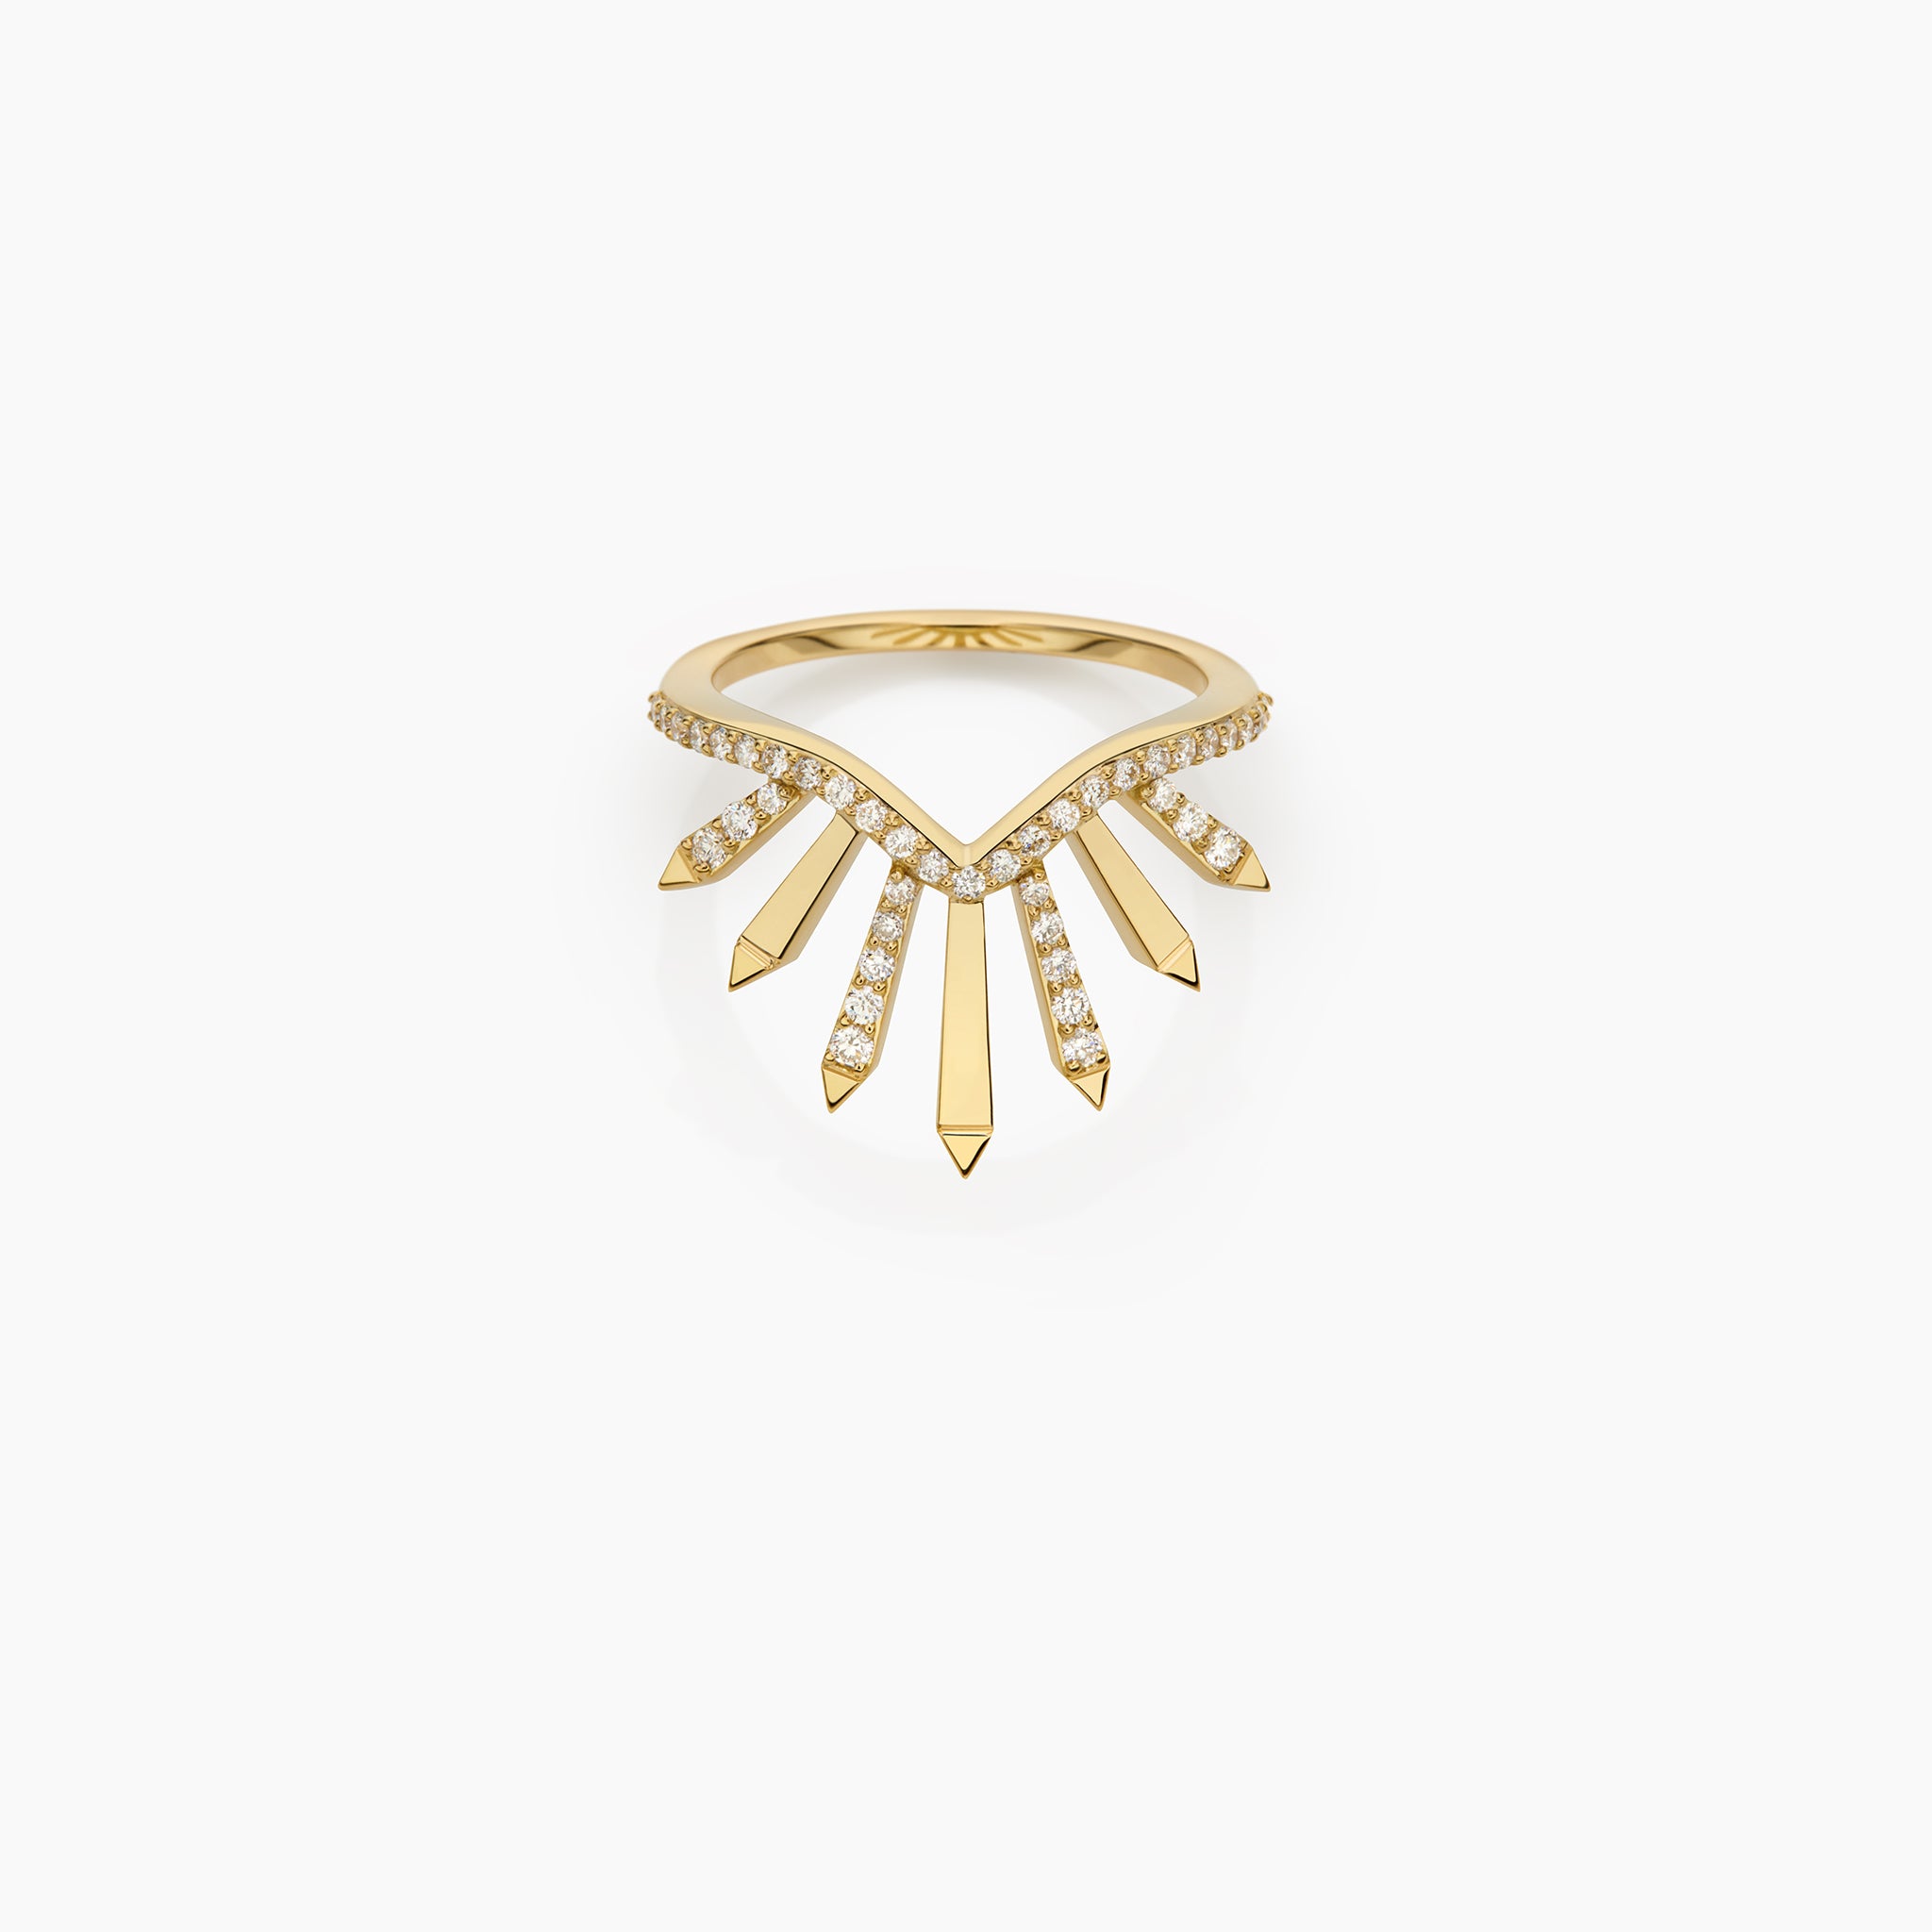 Yellow Gold Ring showcased against an off-white background.